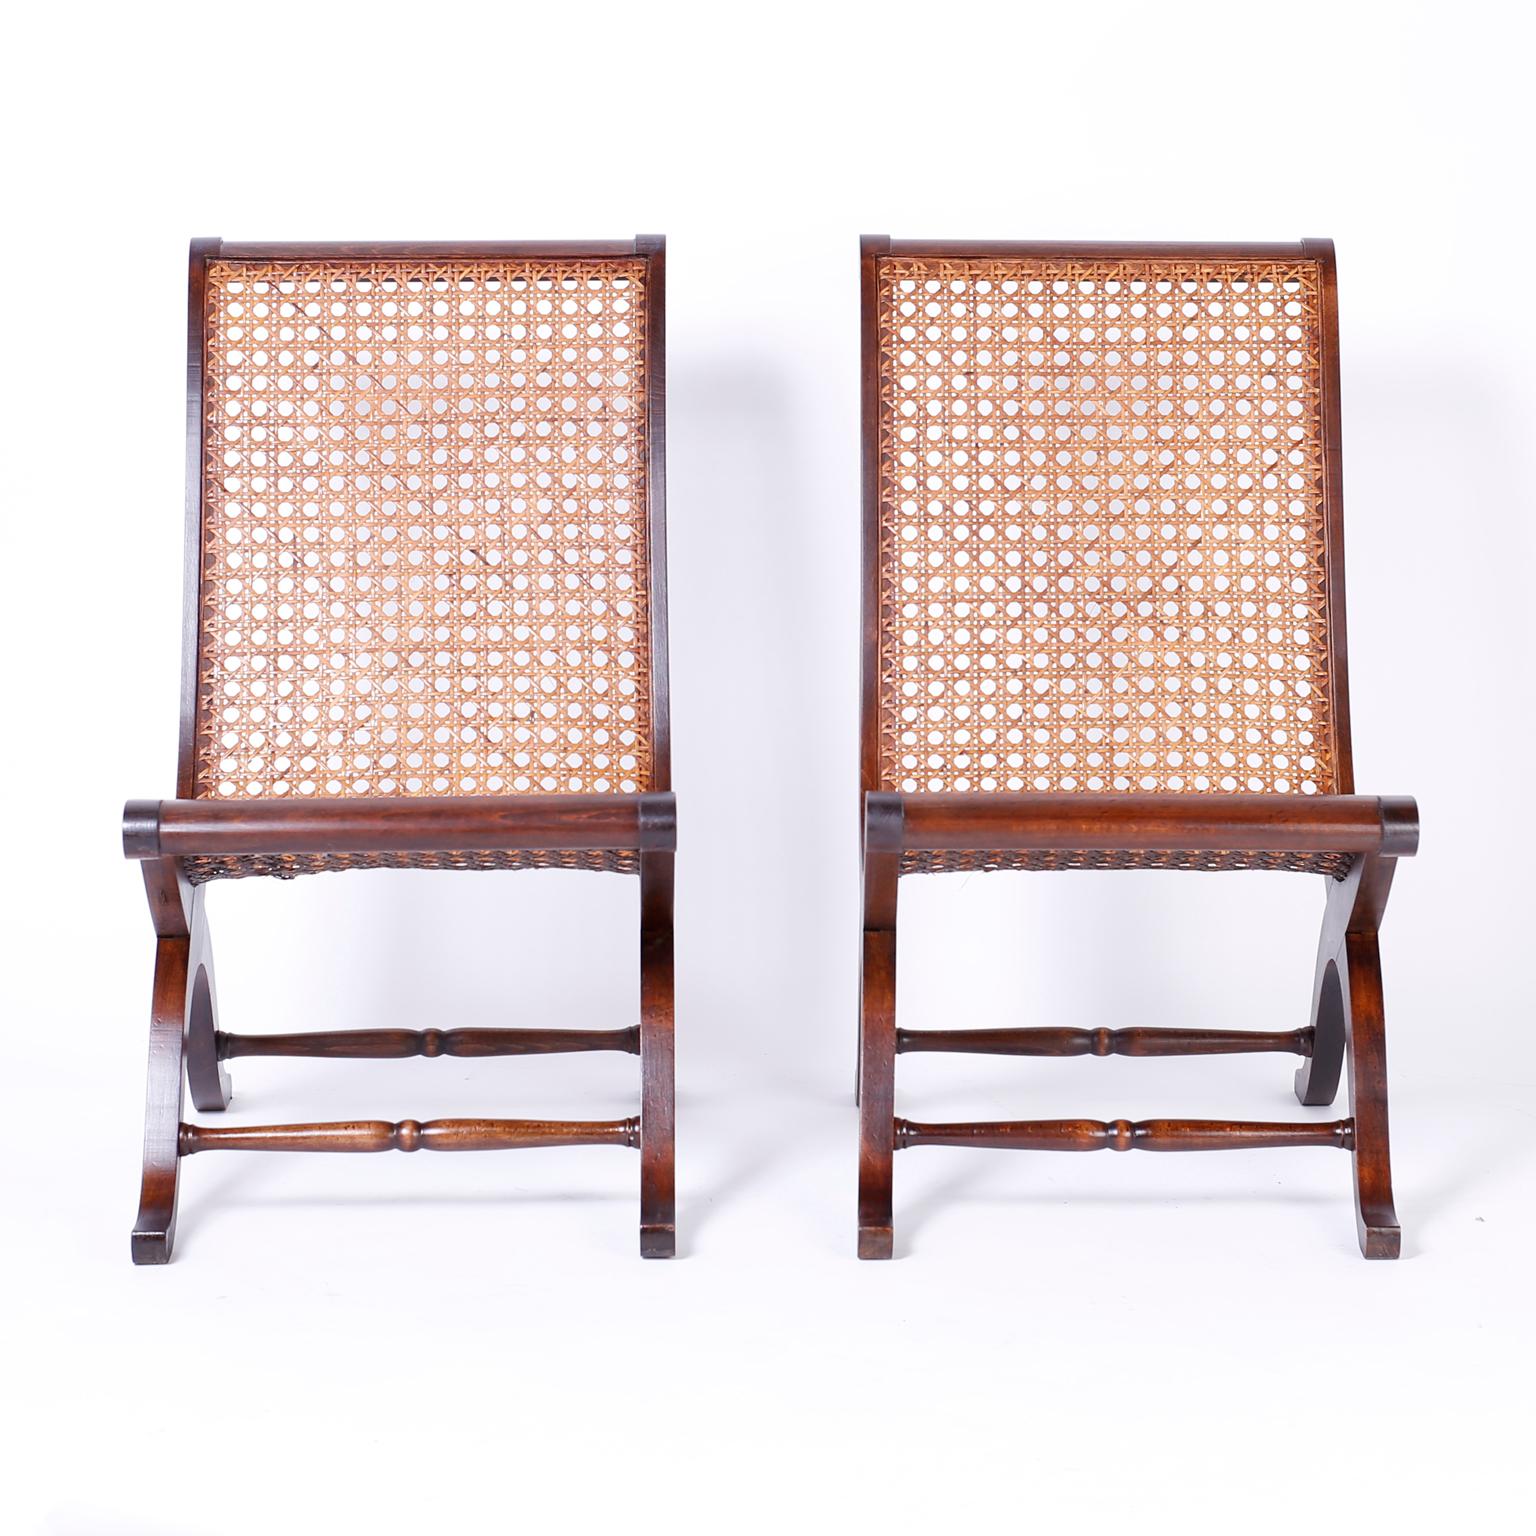 Pair of British colonial style Campeche chairs crafted in mahogany with a dramatic form, caned seat and back, saber legs and turned stretchers.